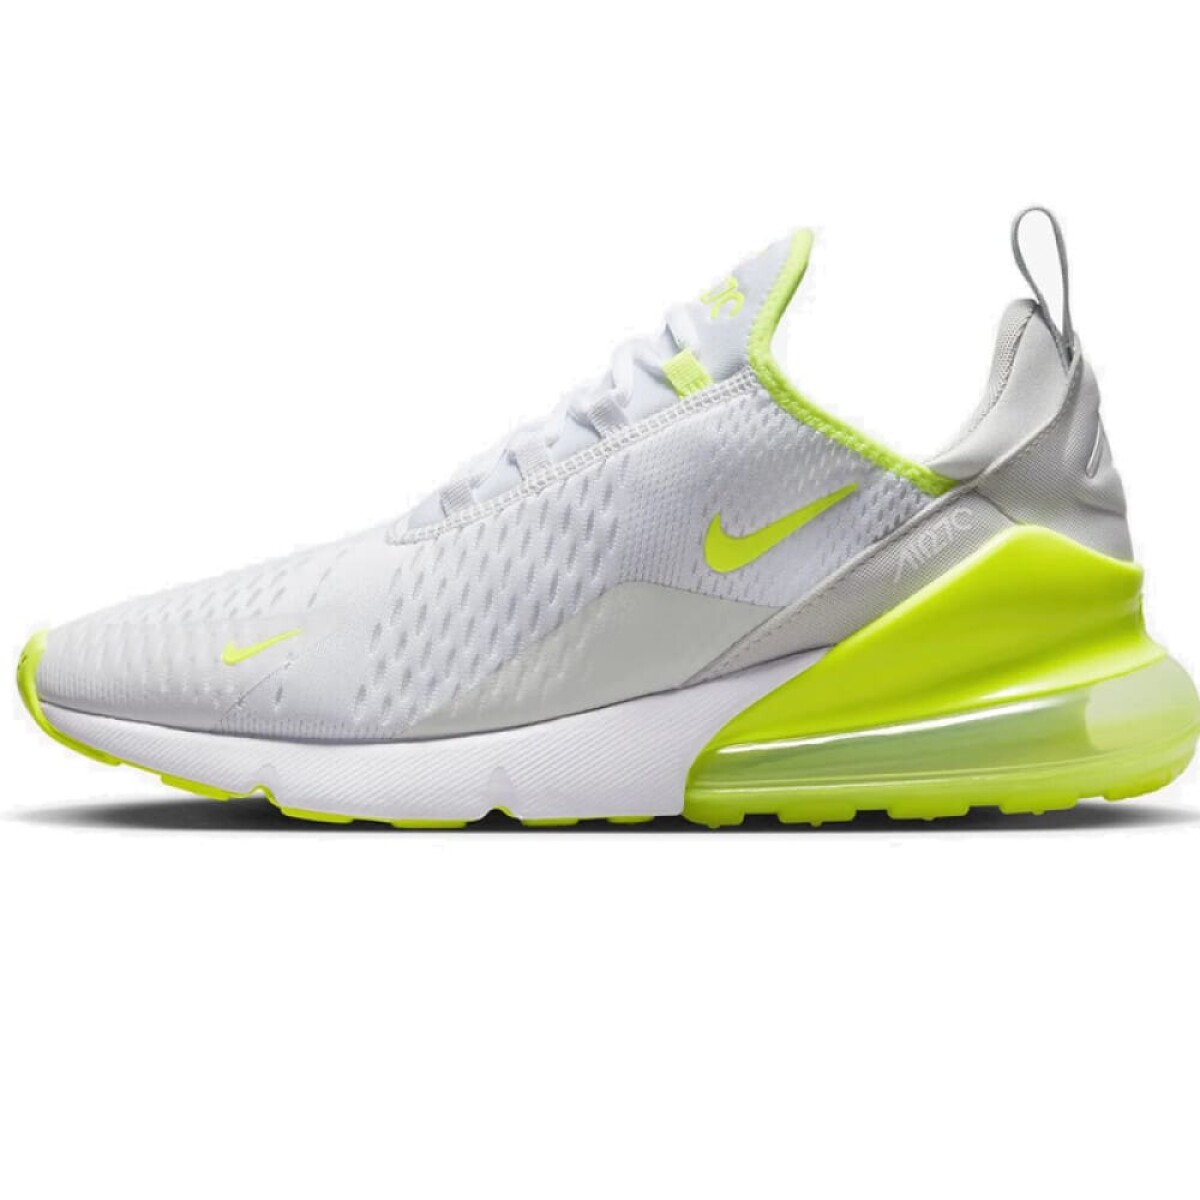 Champion Nike Hombre Air Max 270 Shoes - S/C 